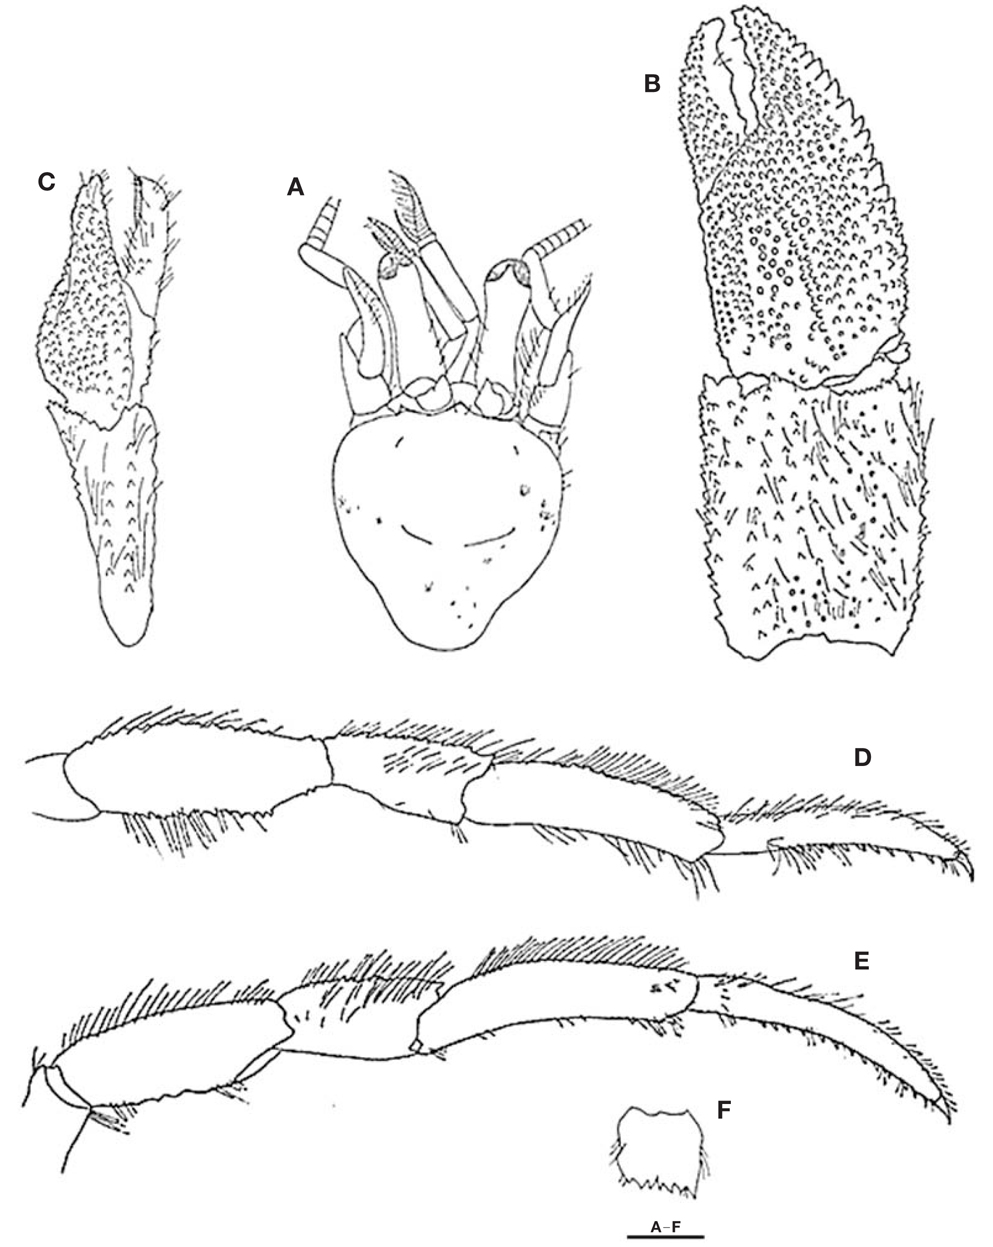 Pagurus undosus (Benedict, 1892), male. A, Shield and cephalic appendages; B, Right cheliped chela and carpus, dorsal; C, Left cheliped chela and carpus, dorsal; D, Right second pereopod, lateral; E, Right third pereopod, lateral; F, Telson, ventral. Scale bar: A-F=2.0 mm.